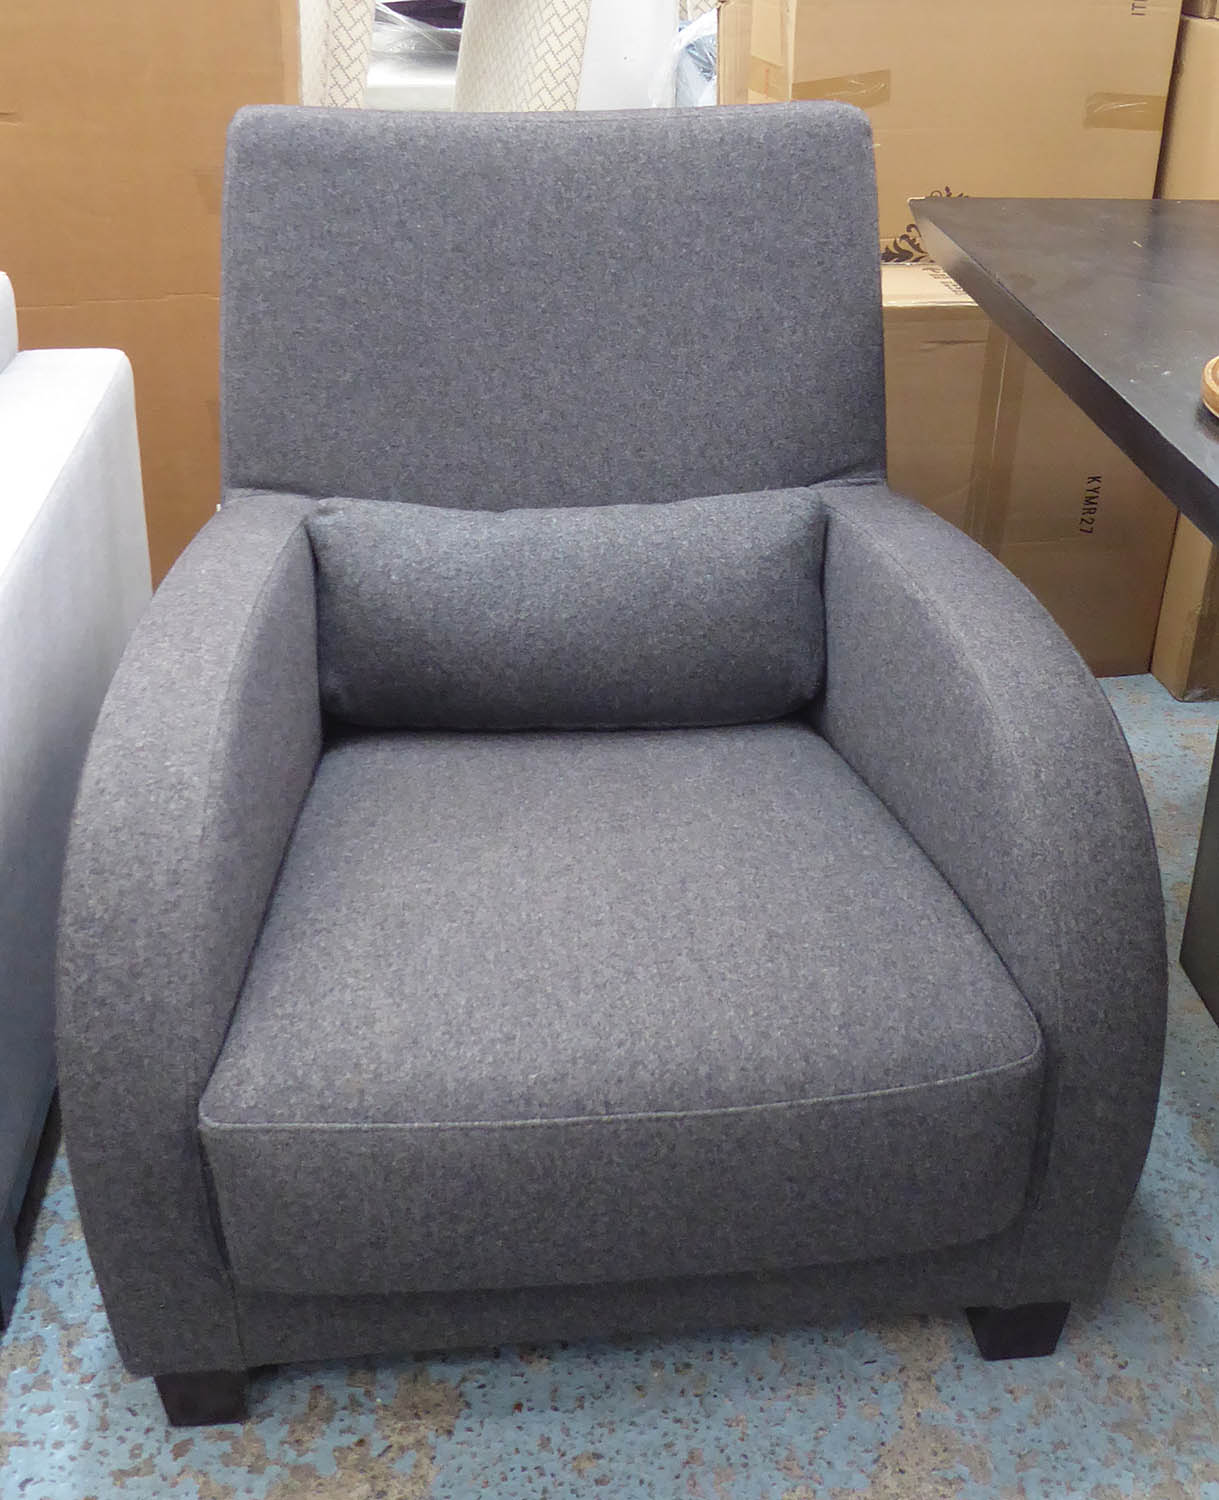 LIGNE ROSET JONATHAN ARMCHAIR, with charcoal grey upholstery, 78cm W x 89cm H. - Image 2 of 4